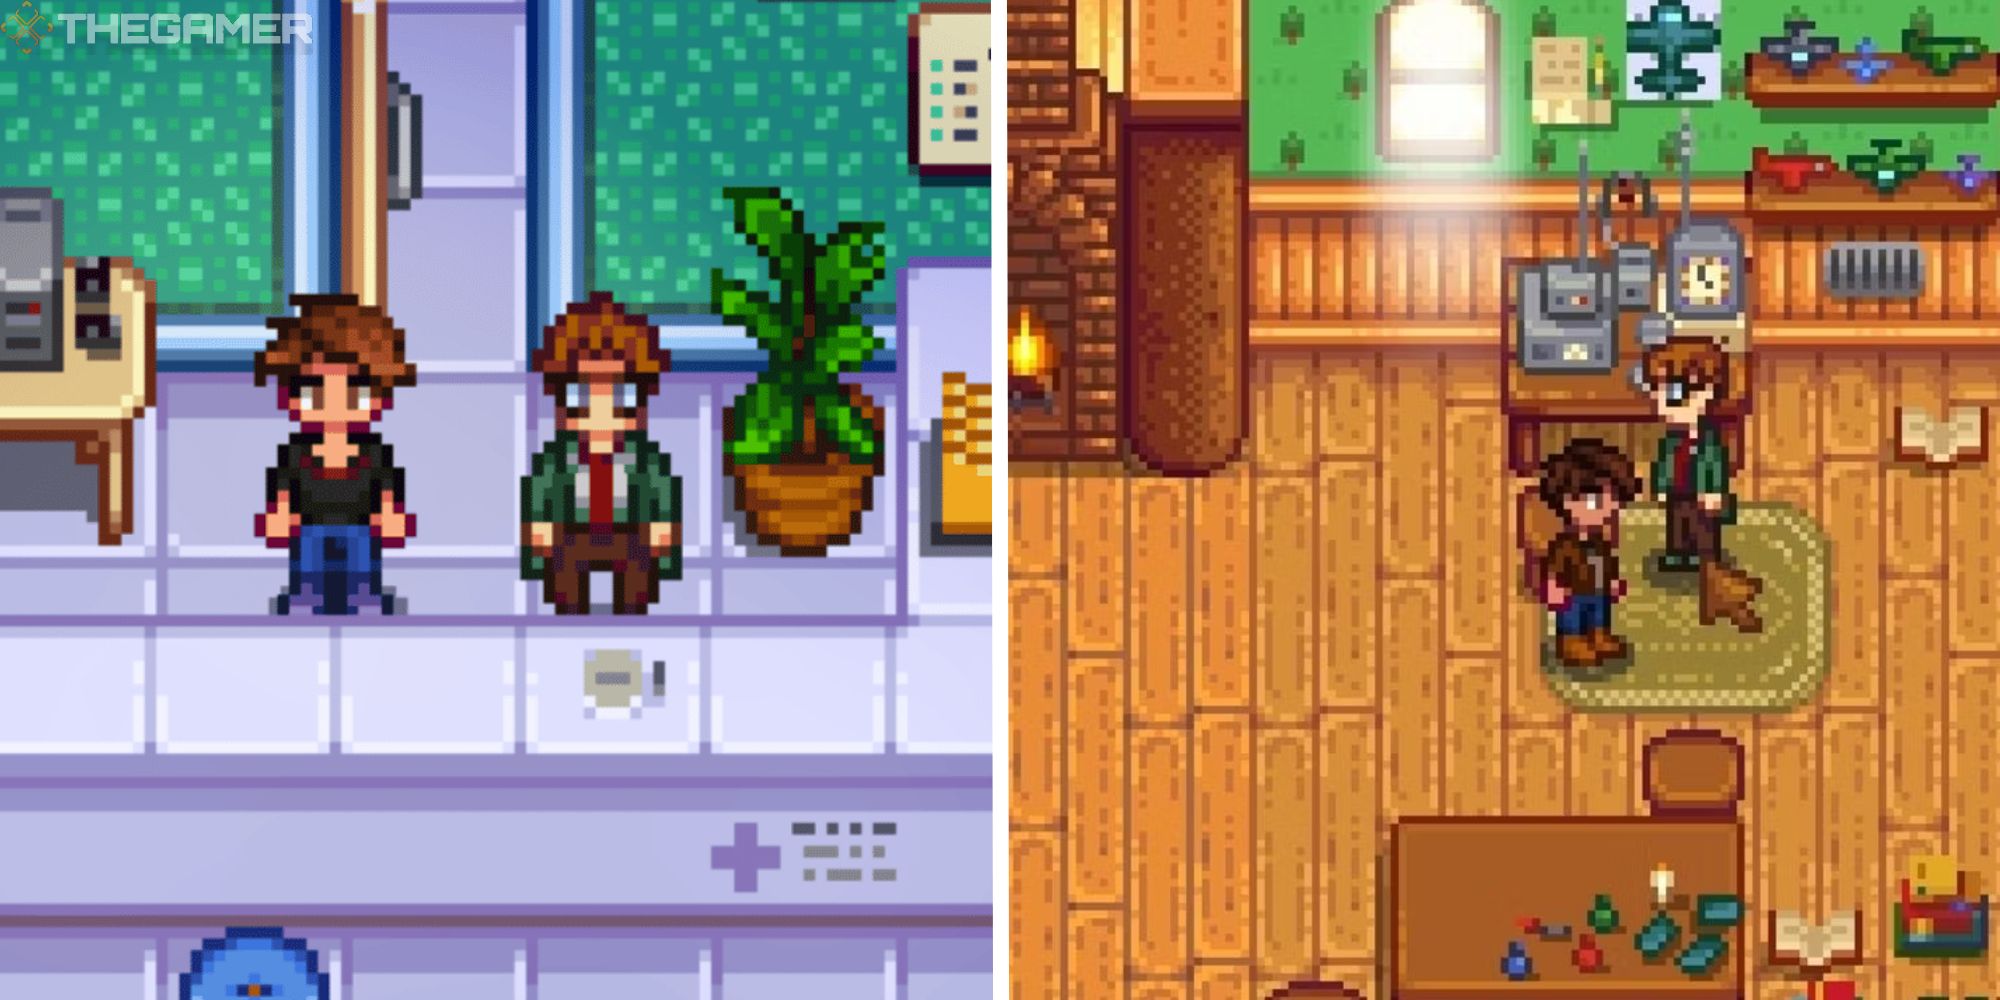 split image of player and harvey at clinic, next to image of harvey and player in his spouse room